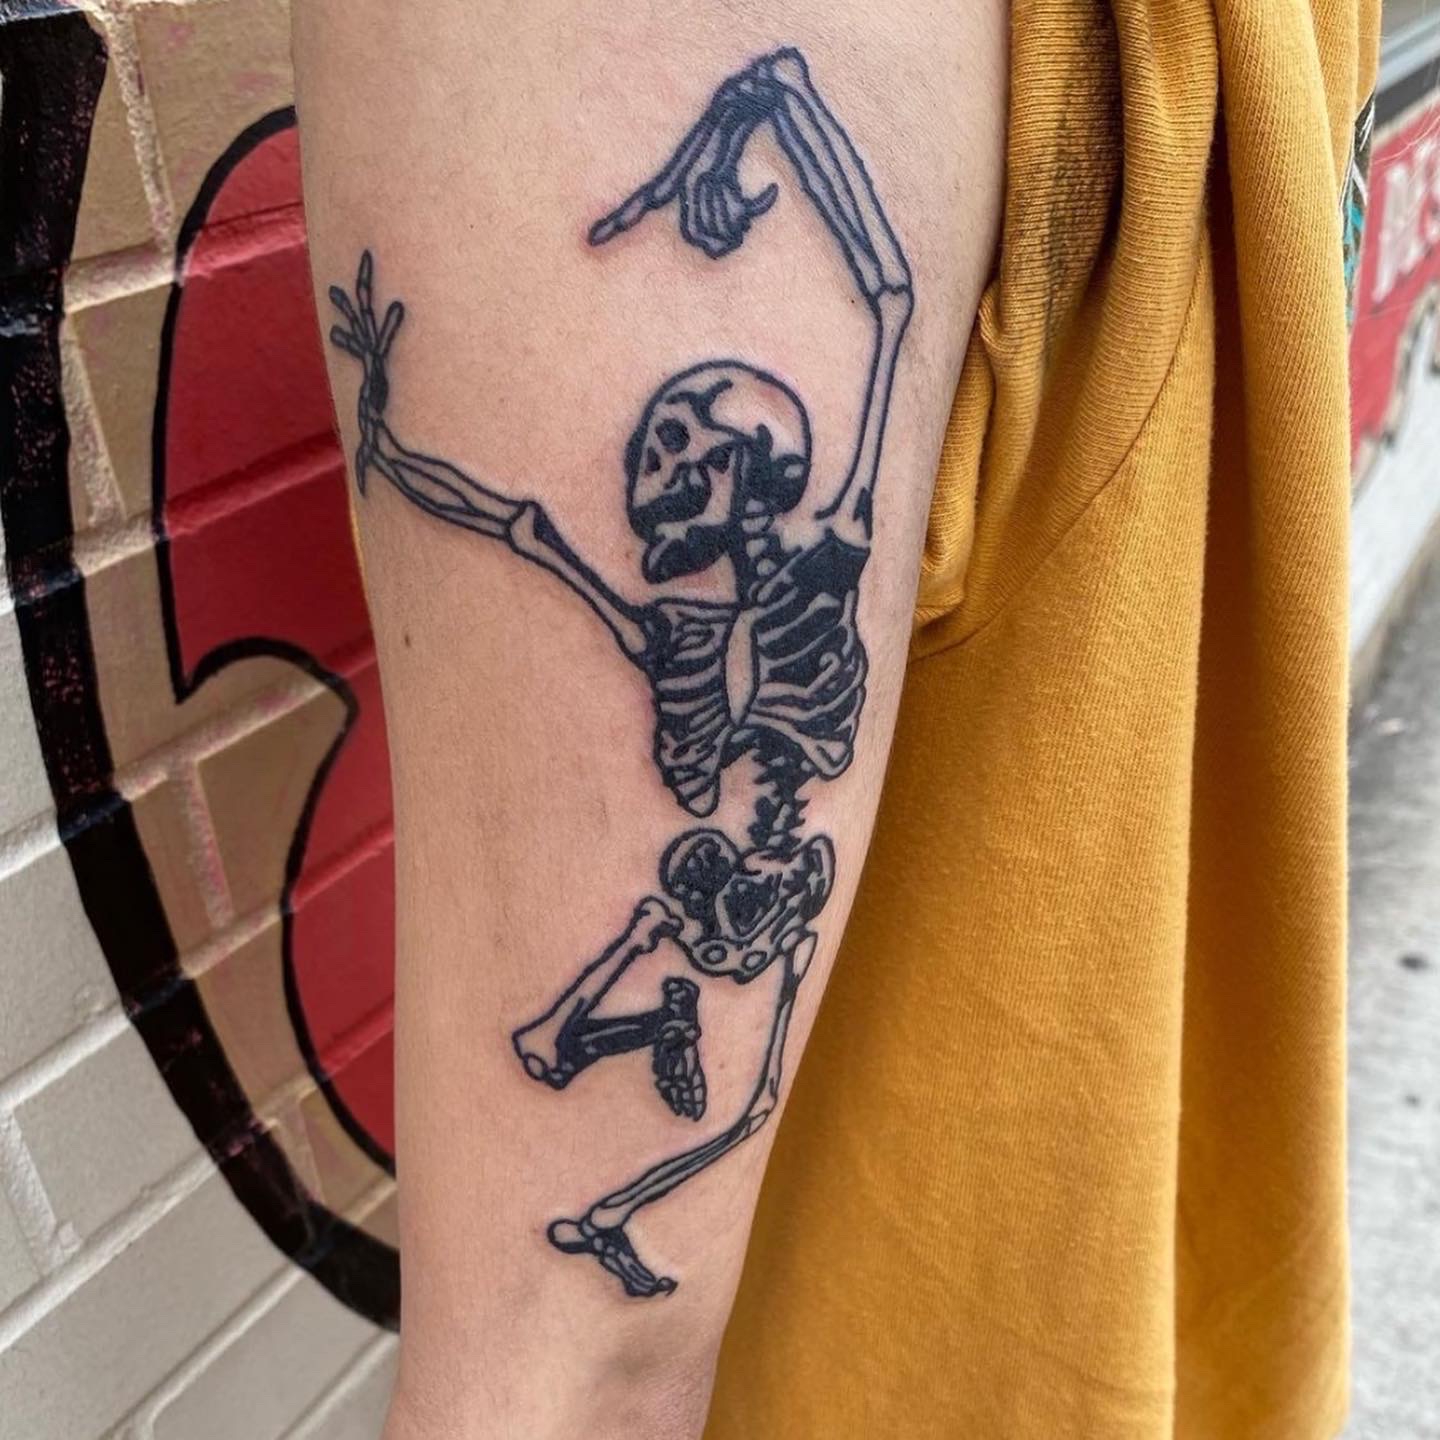 tattoo of a dancing skeleton